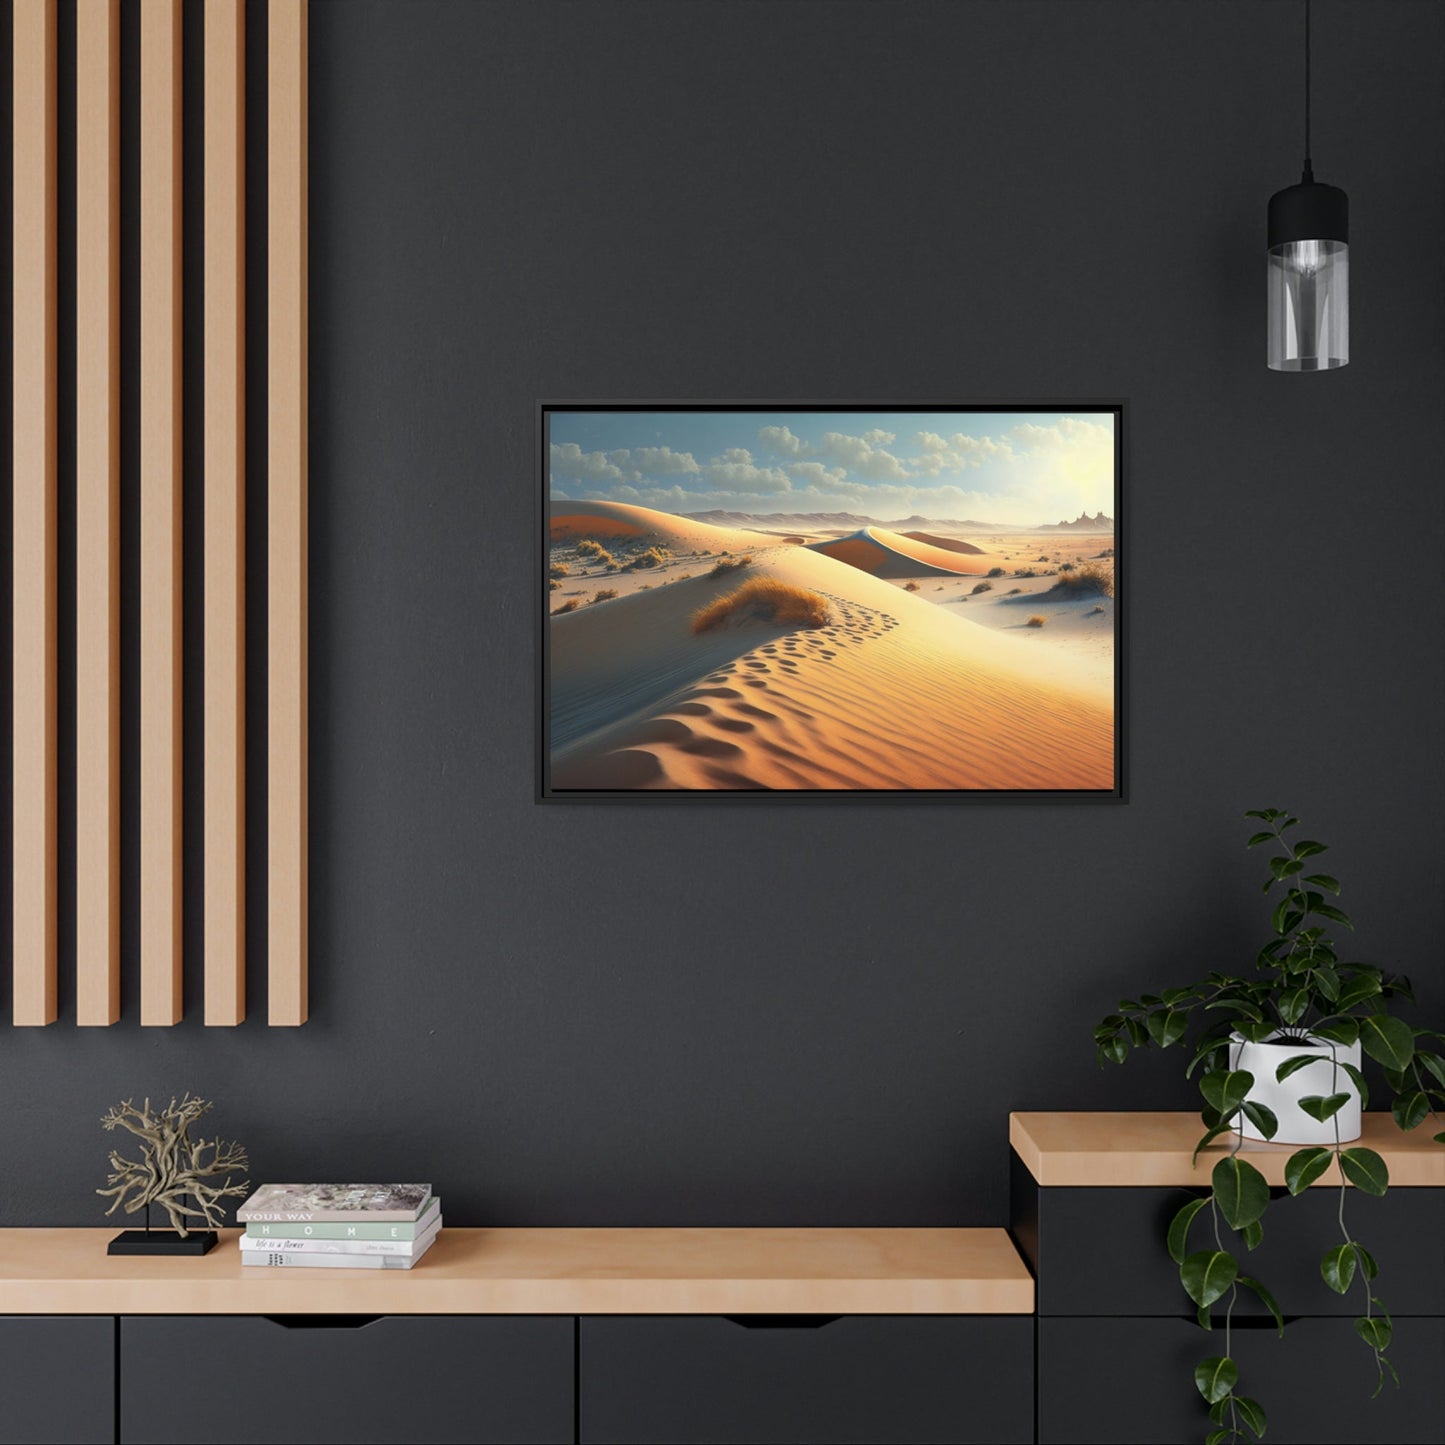 Vast Wonders: Artistic Canvas & Poster Print of the Desert for Your Wall